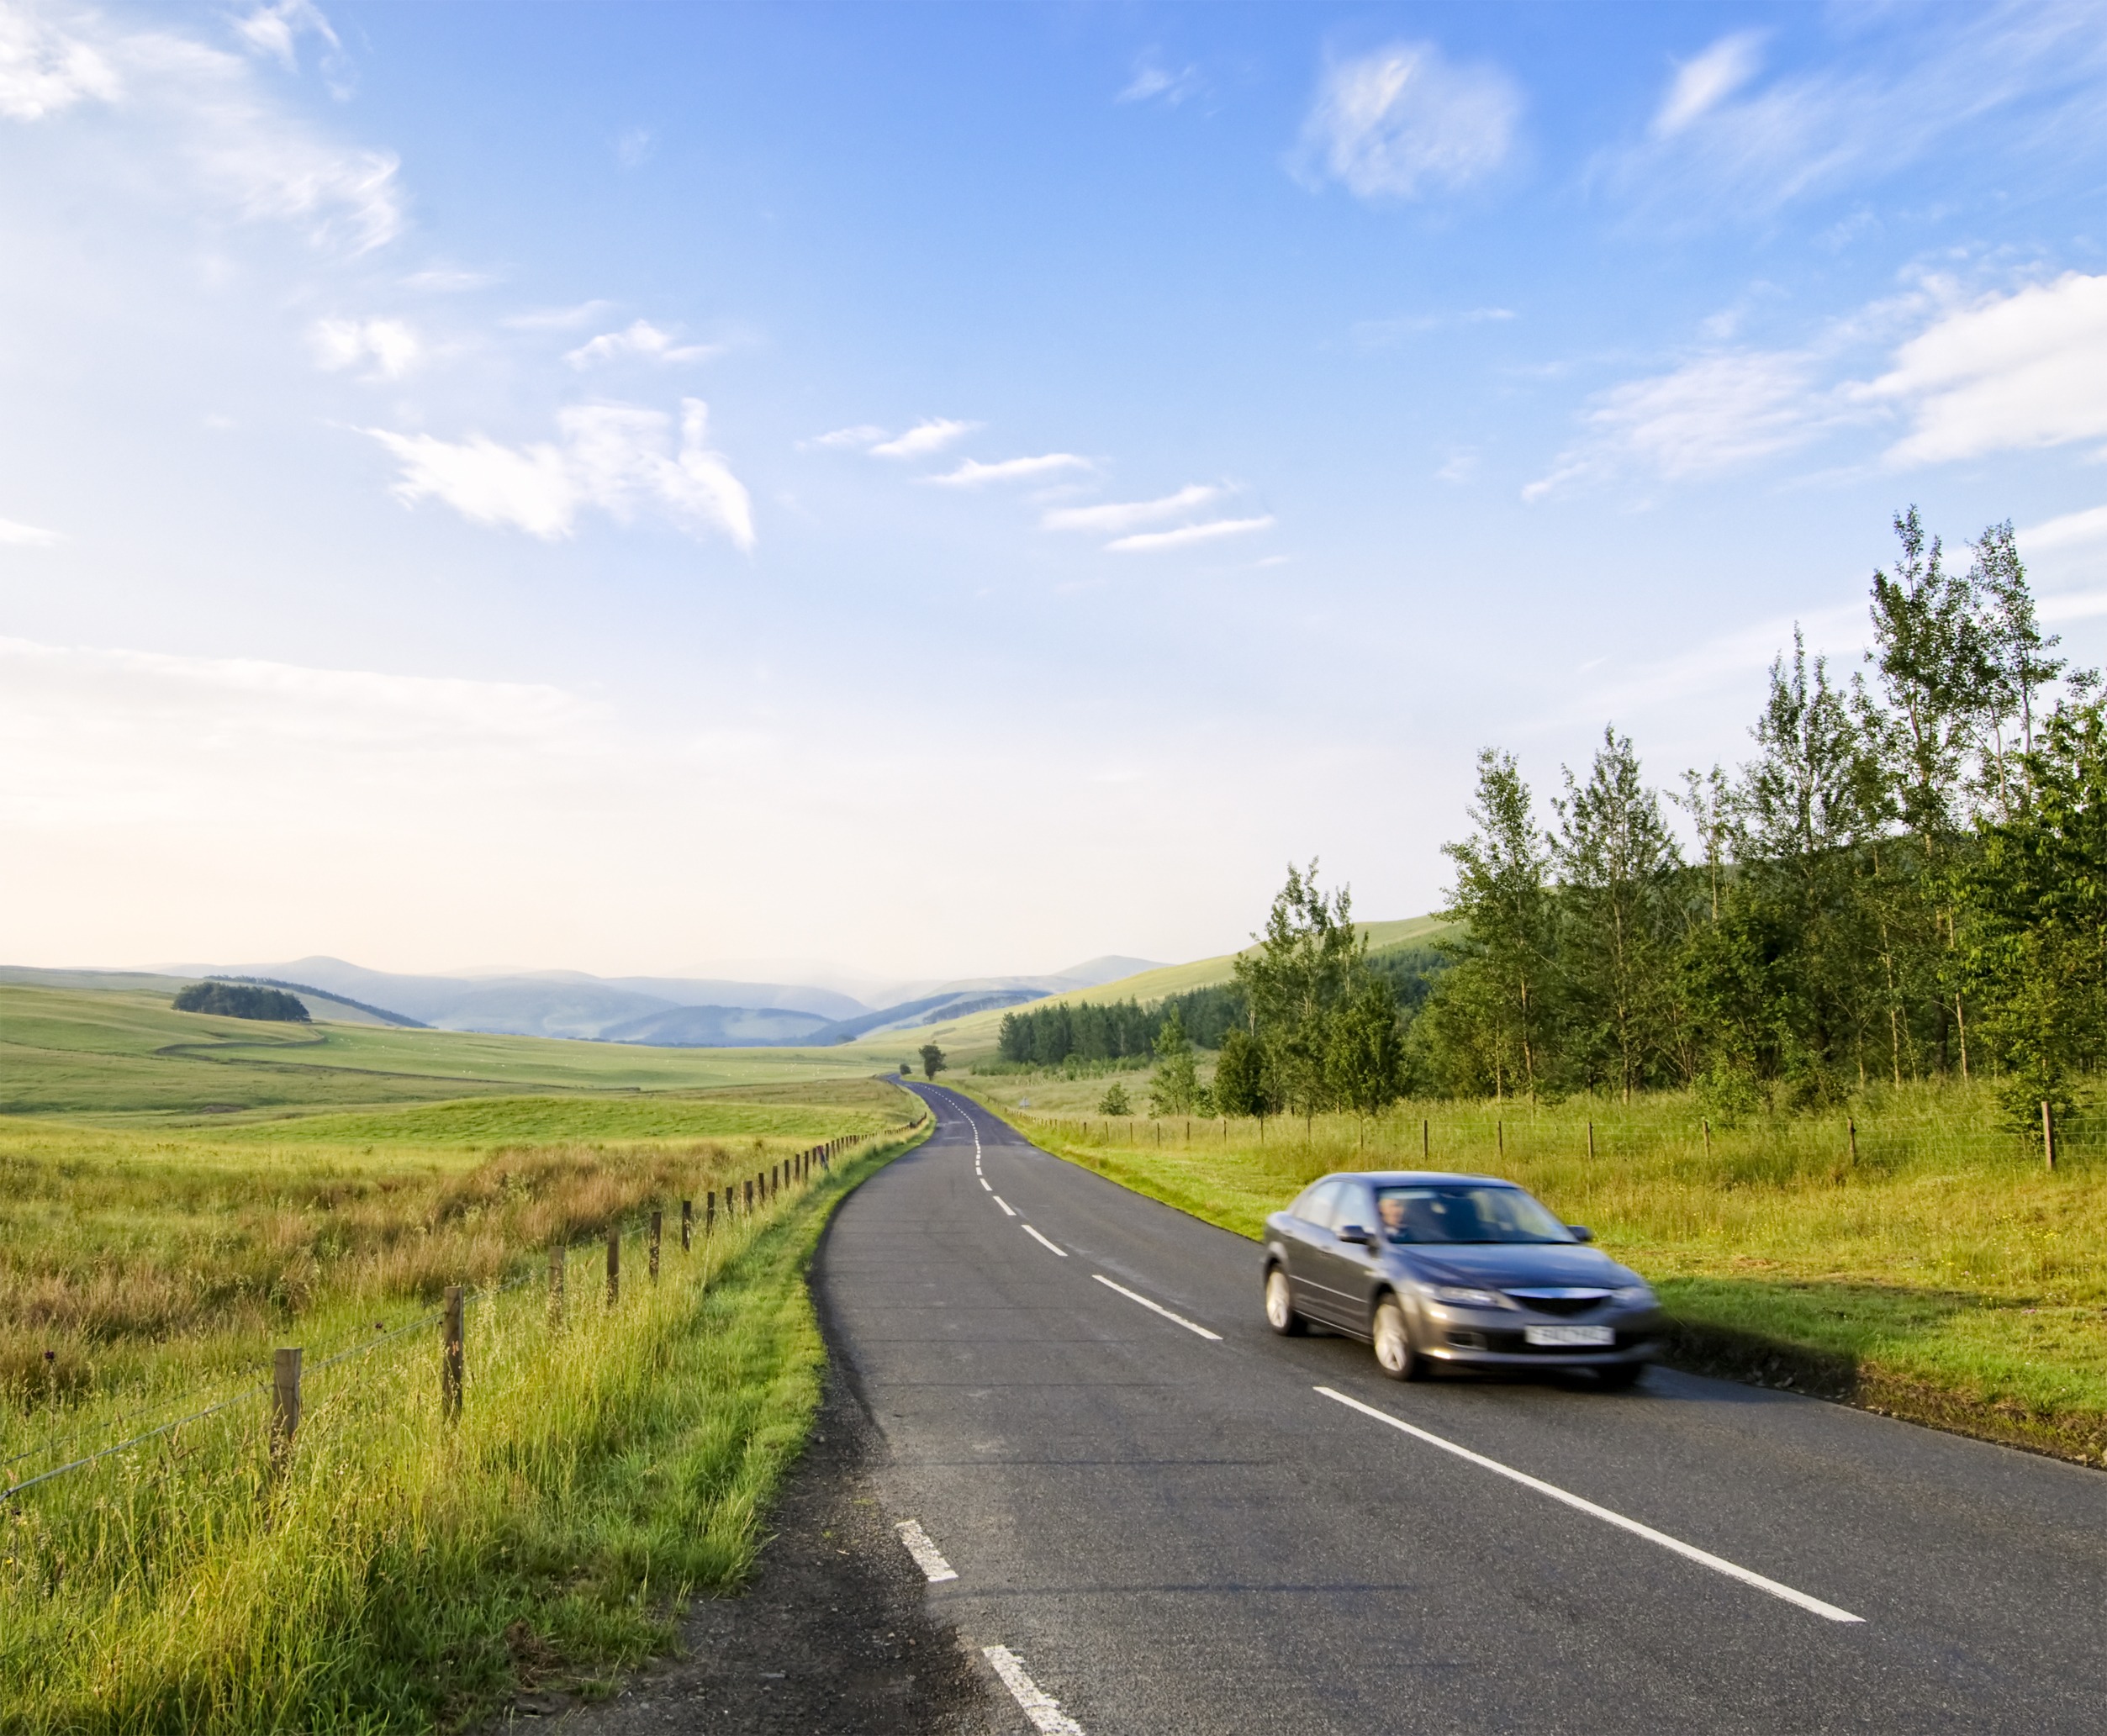 what do you need to watch out for when driving in rural areas